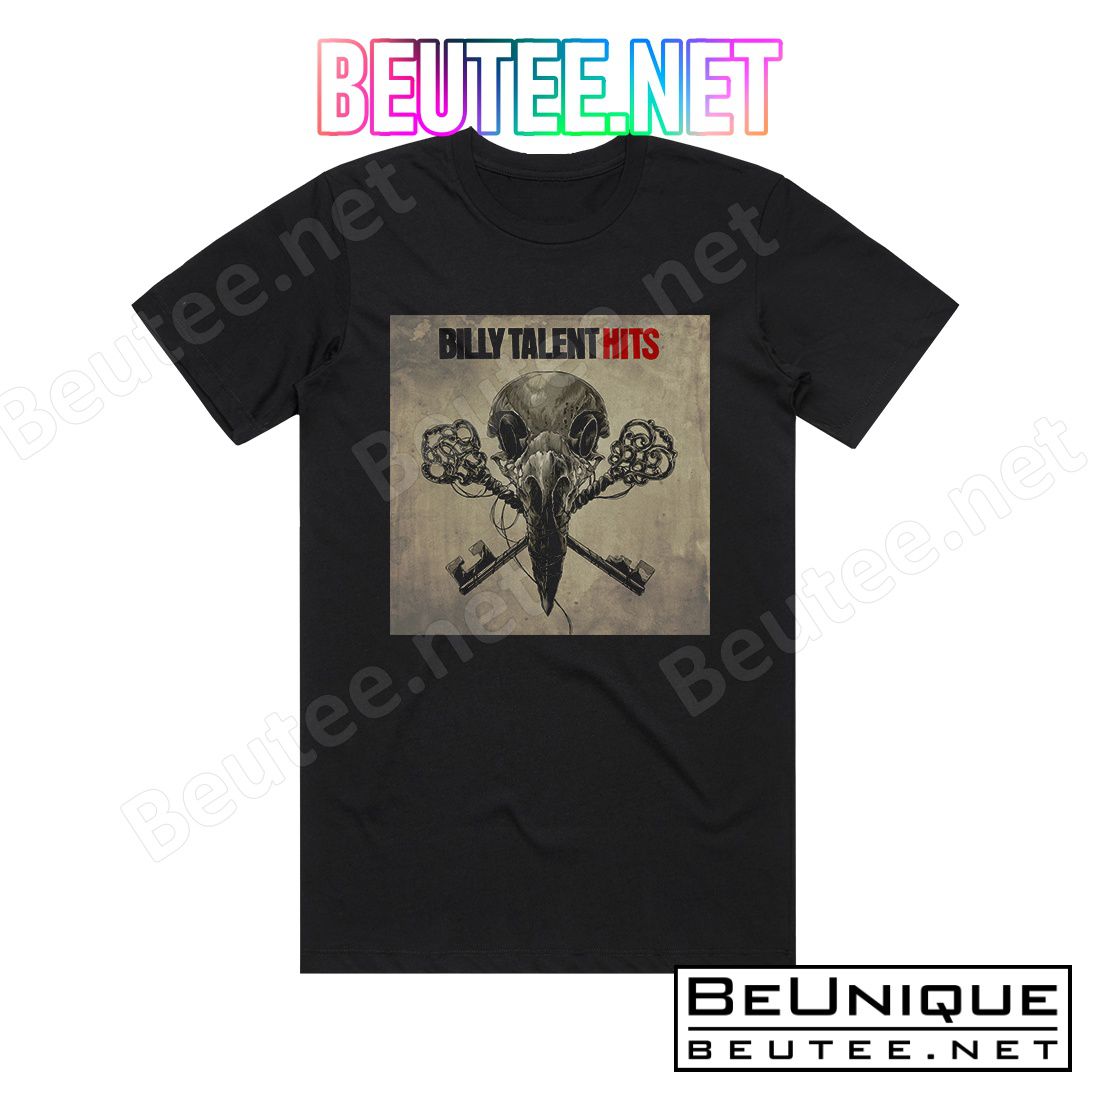 Billy Talent Hits Album Cover T-Shirt